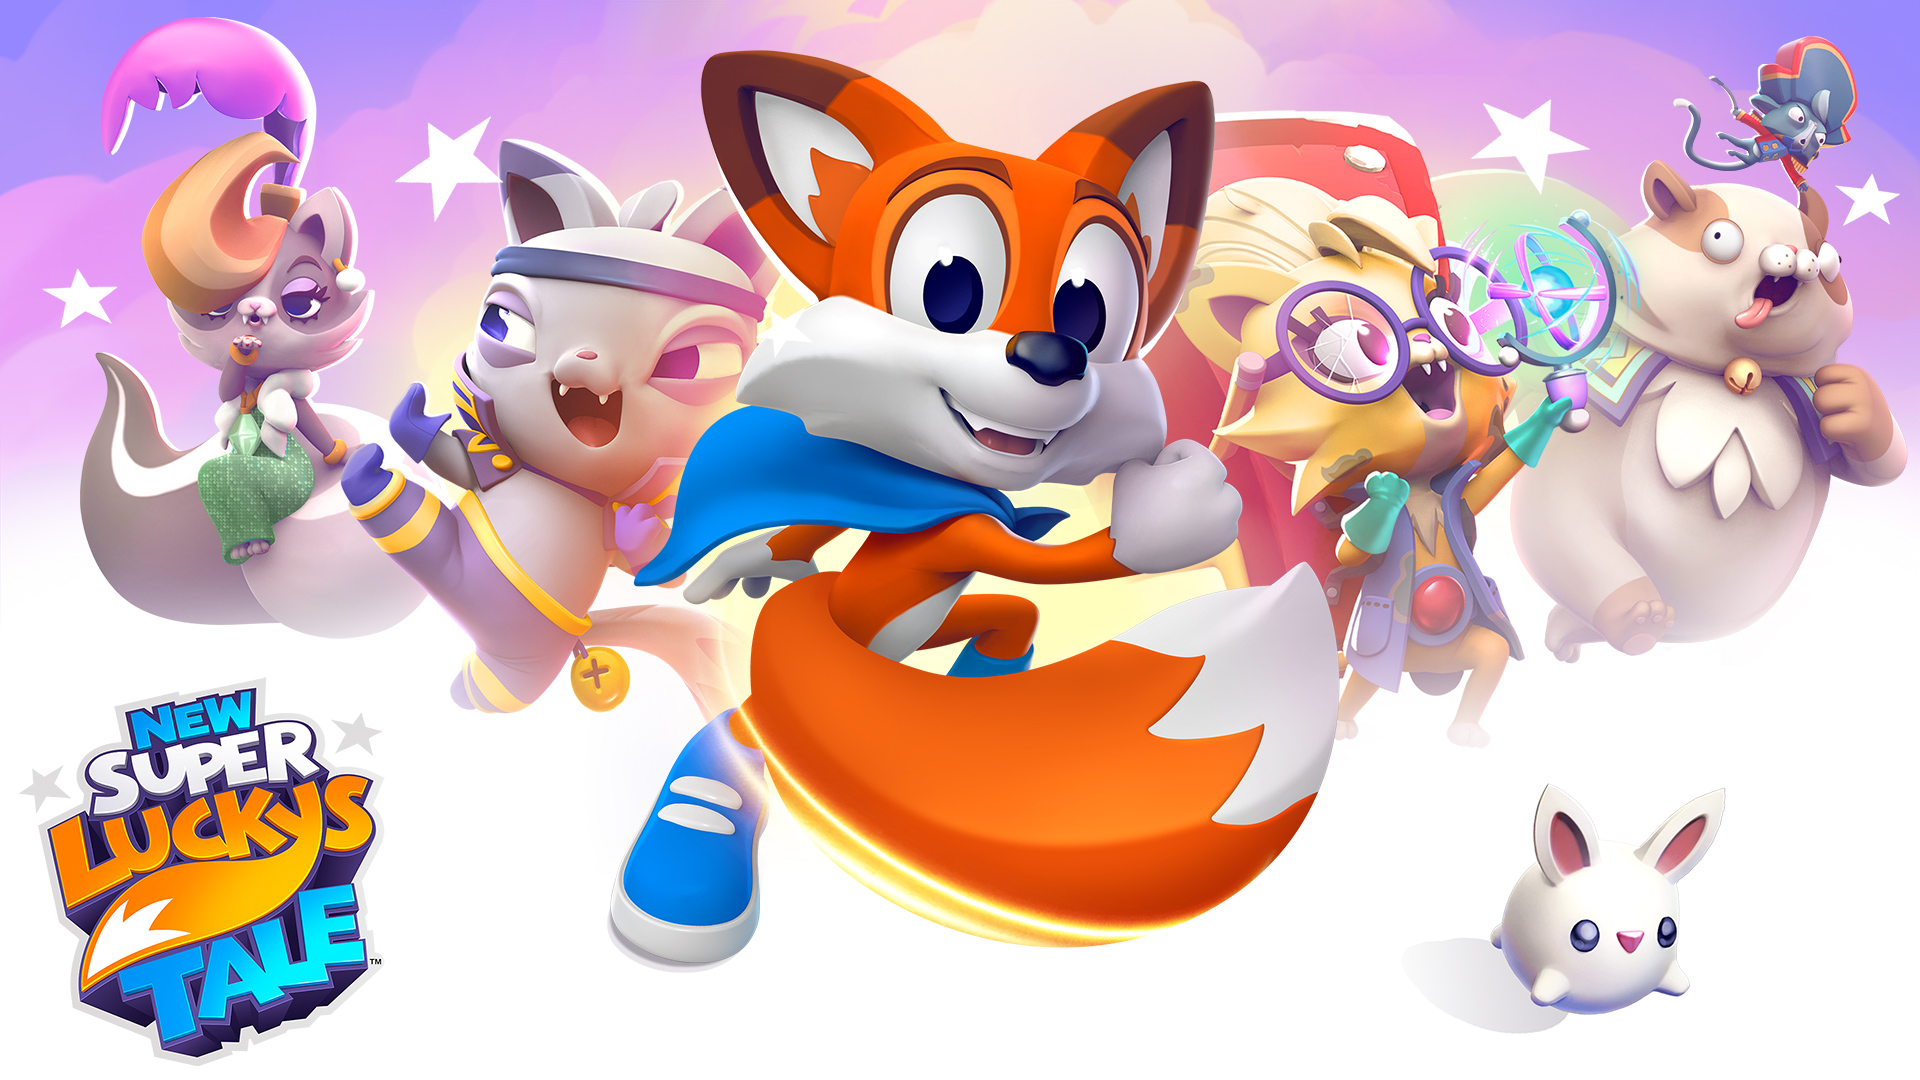 New Super Lucky’s Tale เตรียมลง PS4 และ Xbox One ในเร็ว ๆ นี้